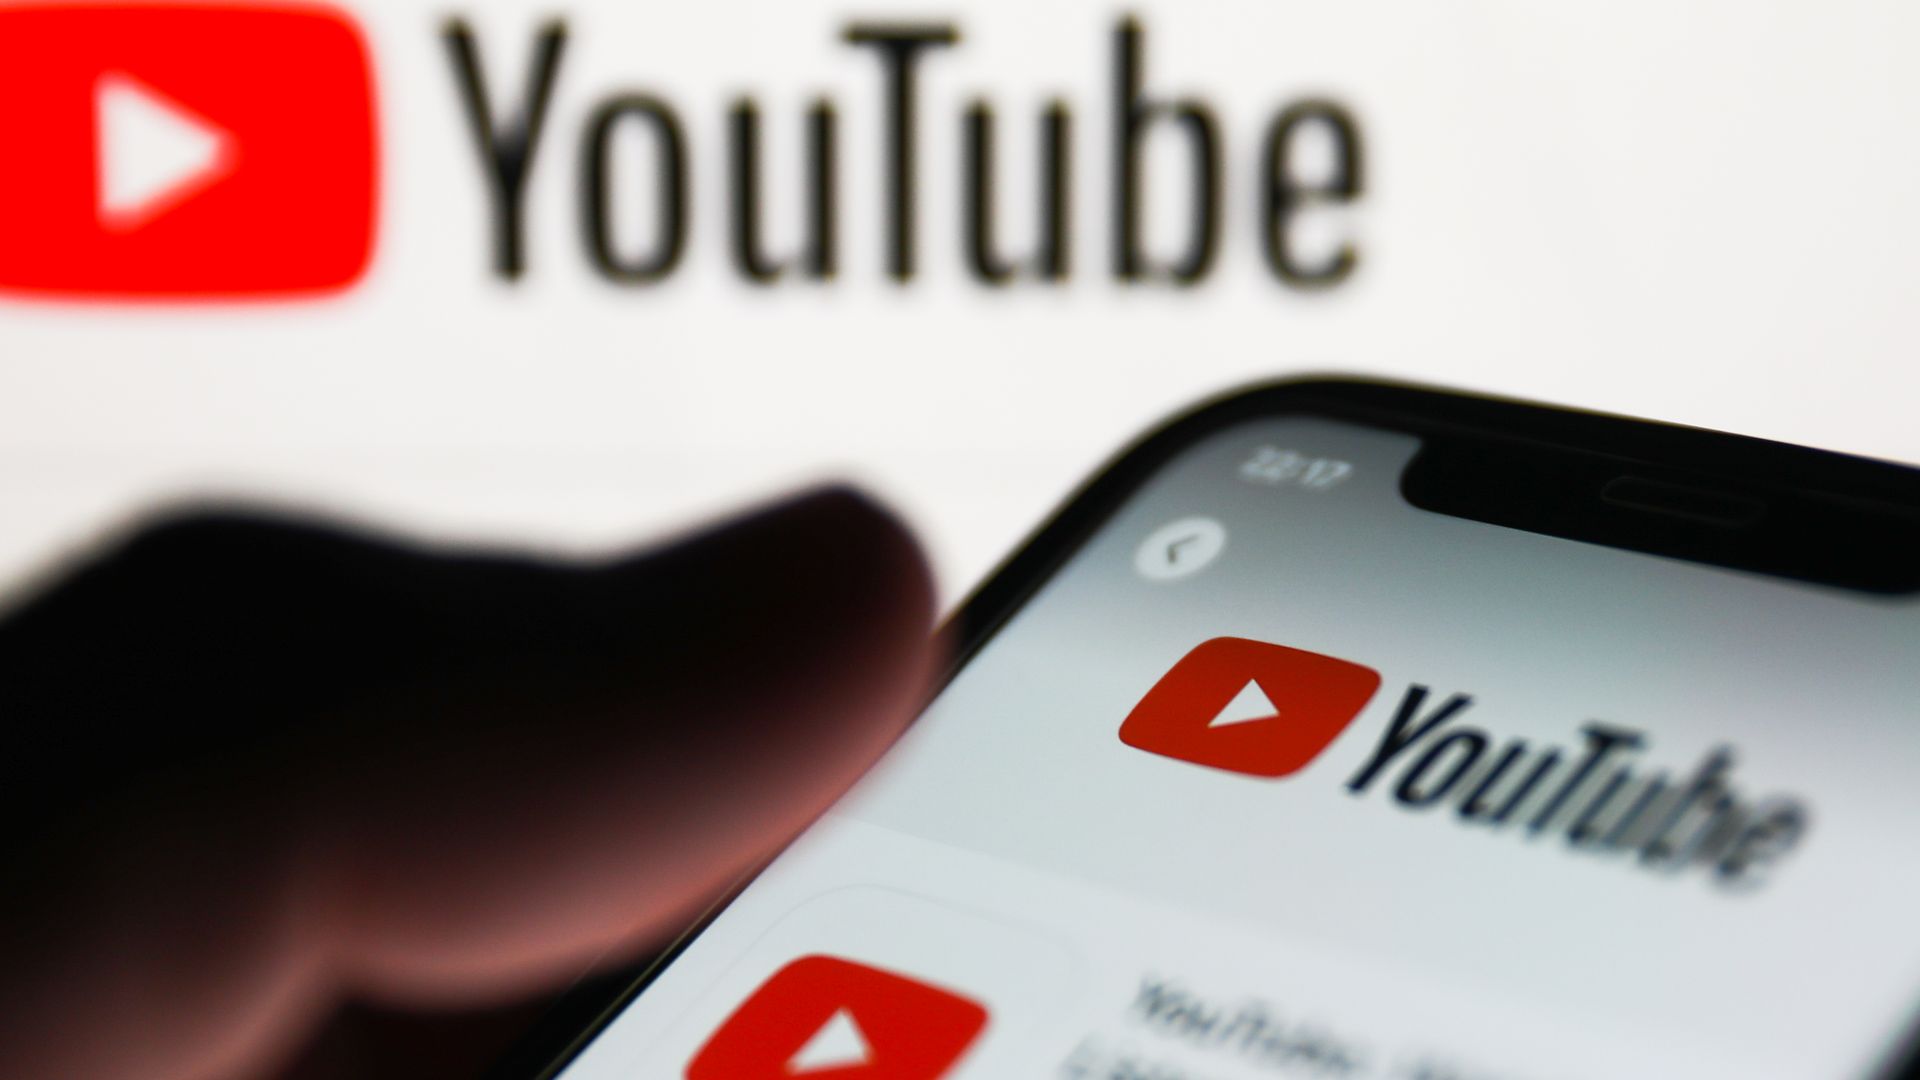 A study found the YouTube algorithm tends to recommend right-leaning and Christian videos, even for those who don't watch related content.